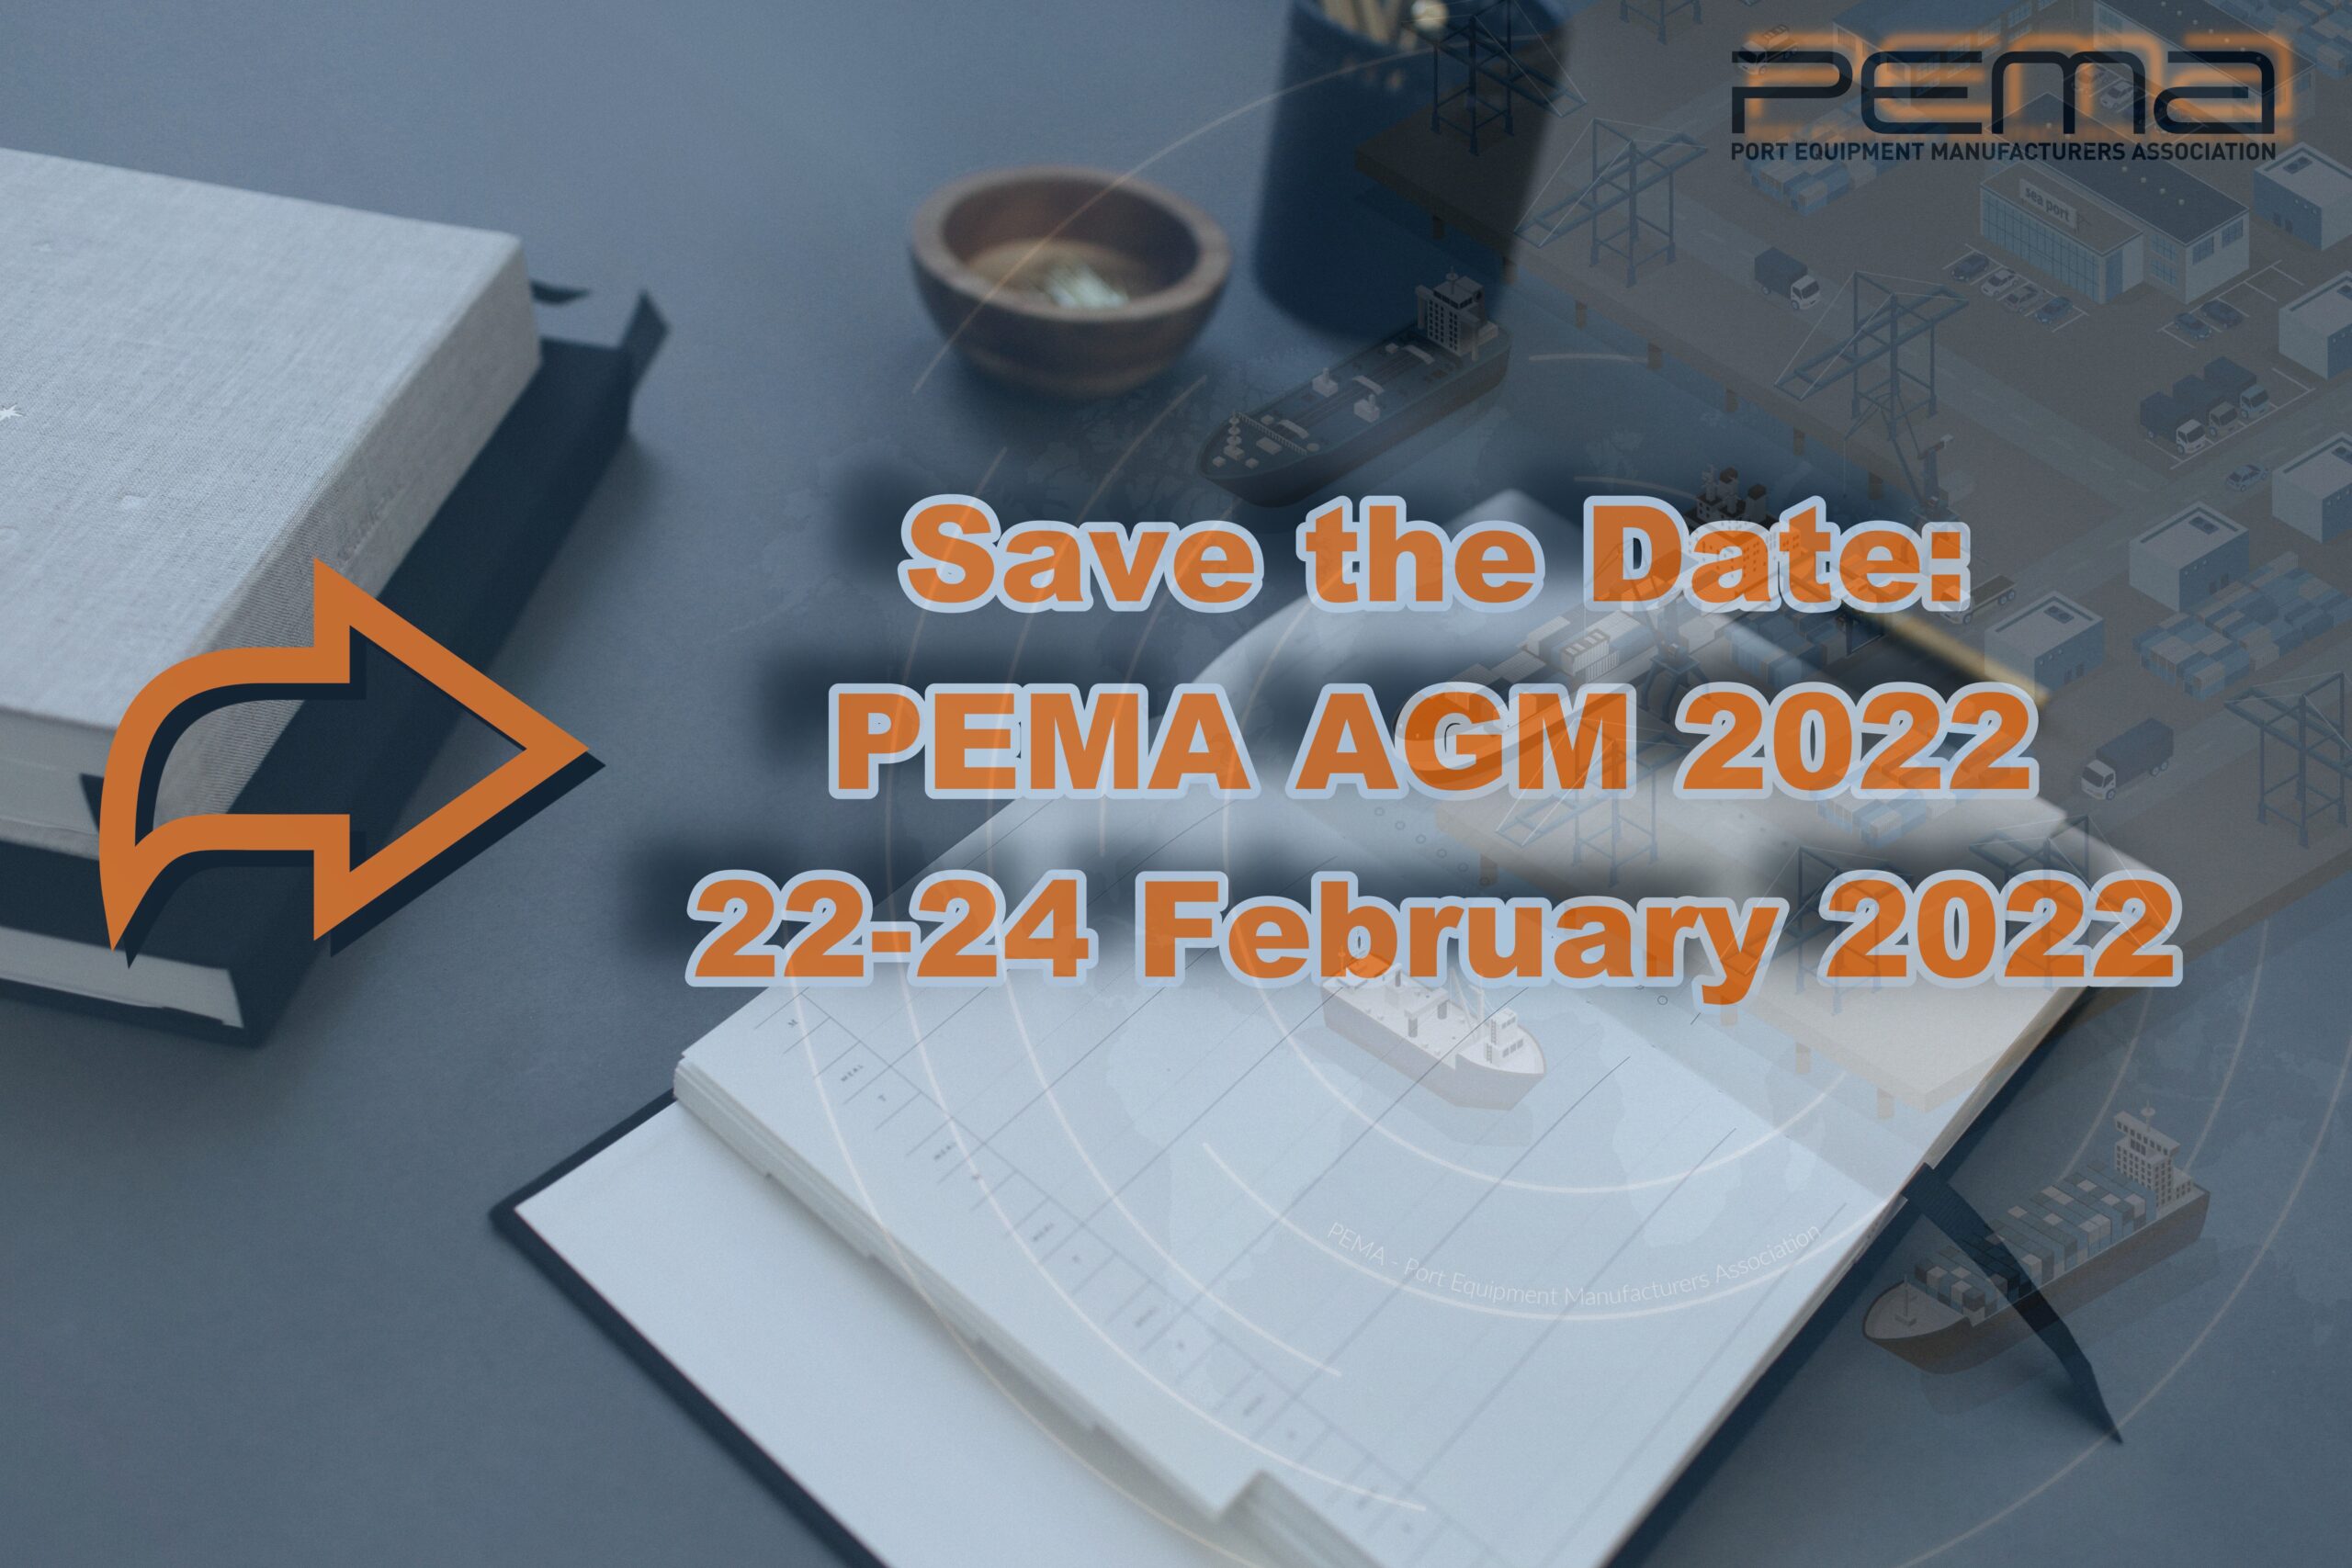 PEMA AGM event is coming back live in 2022 !